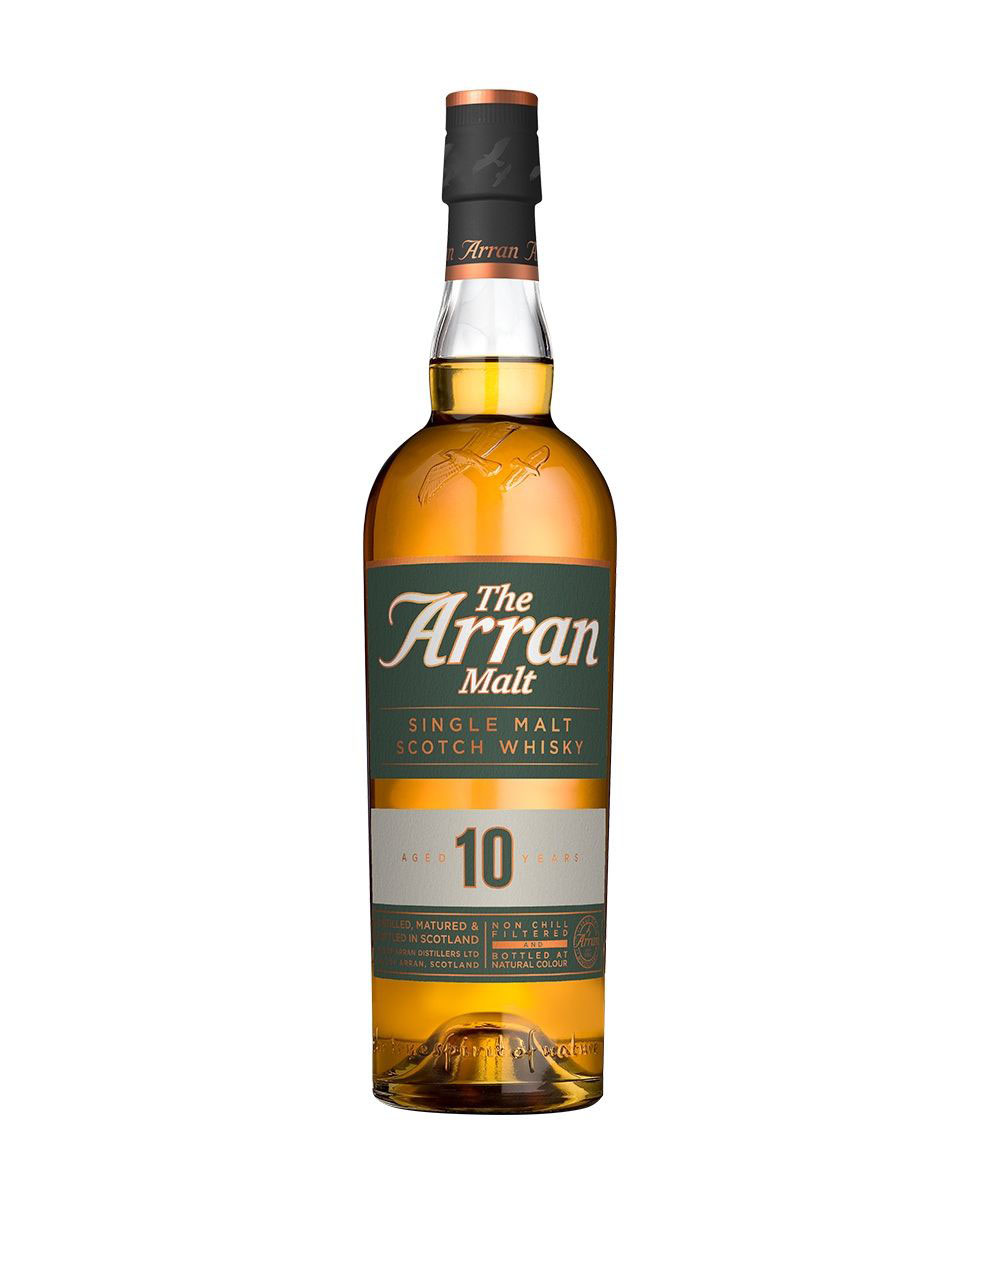 The Arran 10 Year Old